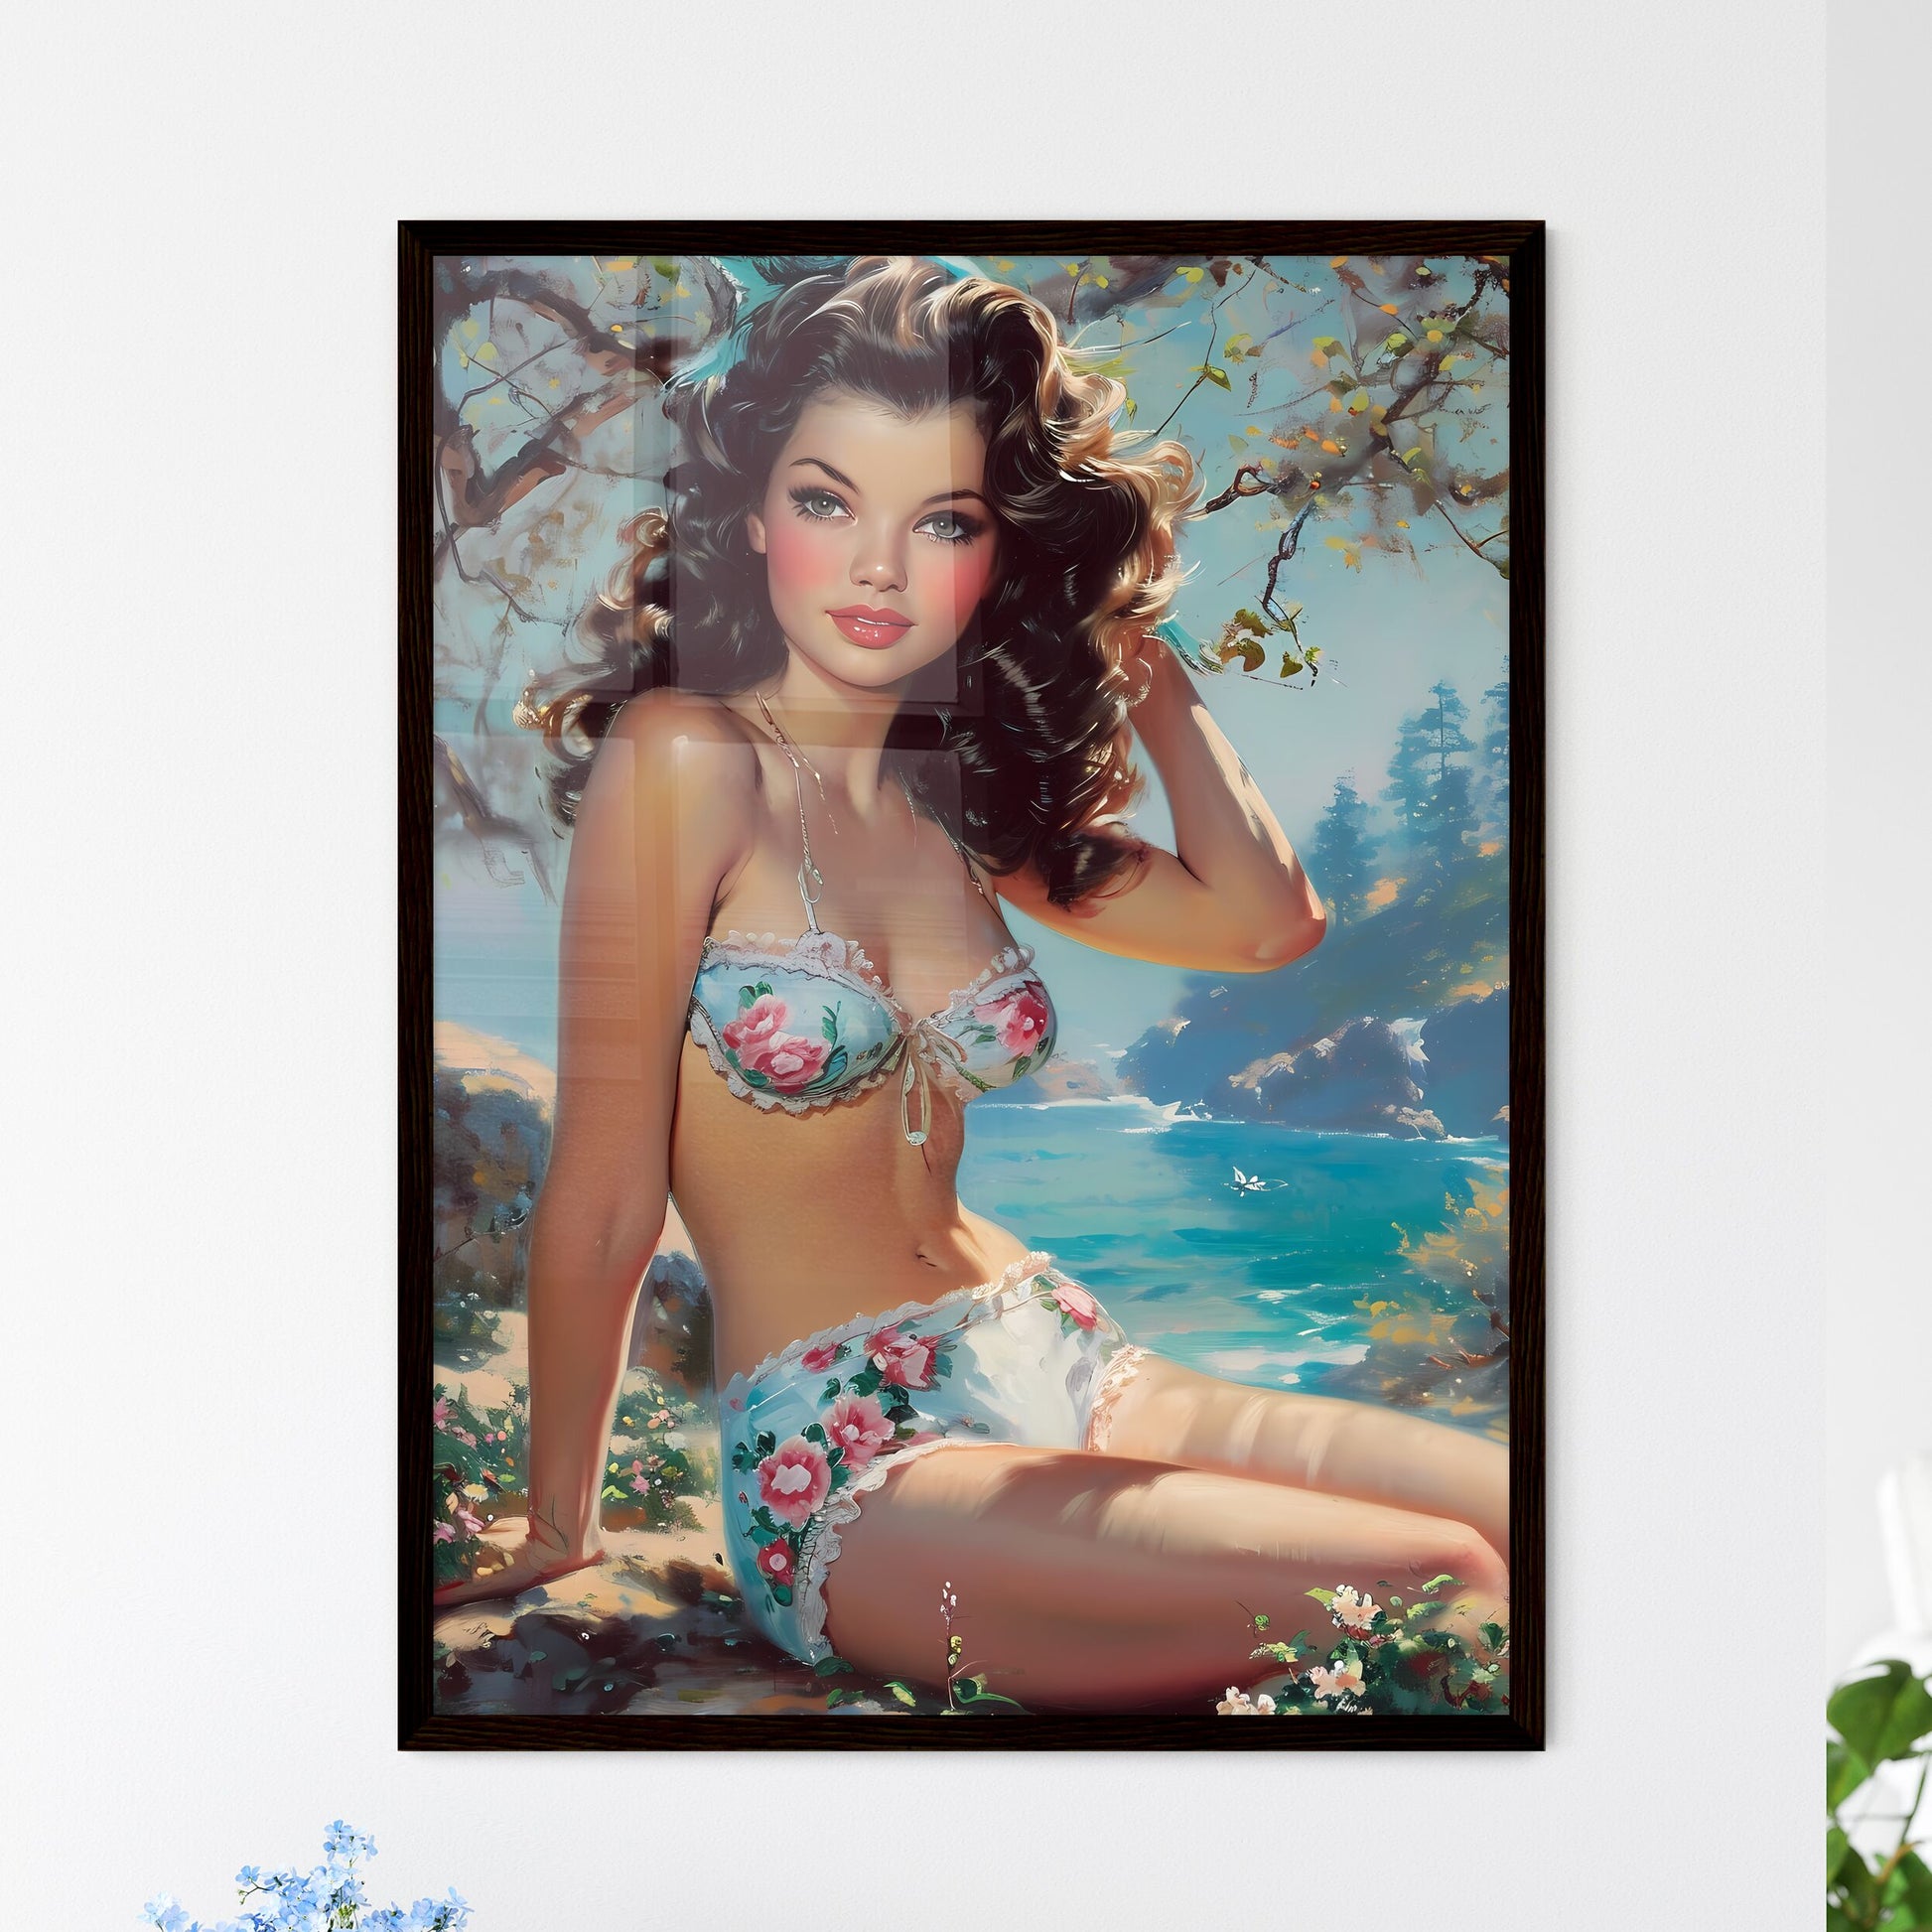 Pin up pedigree pinups 50s - Art print of a woman in a garment sitting on a rock Default Title